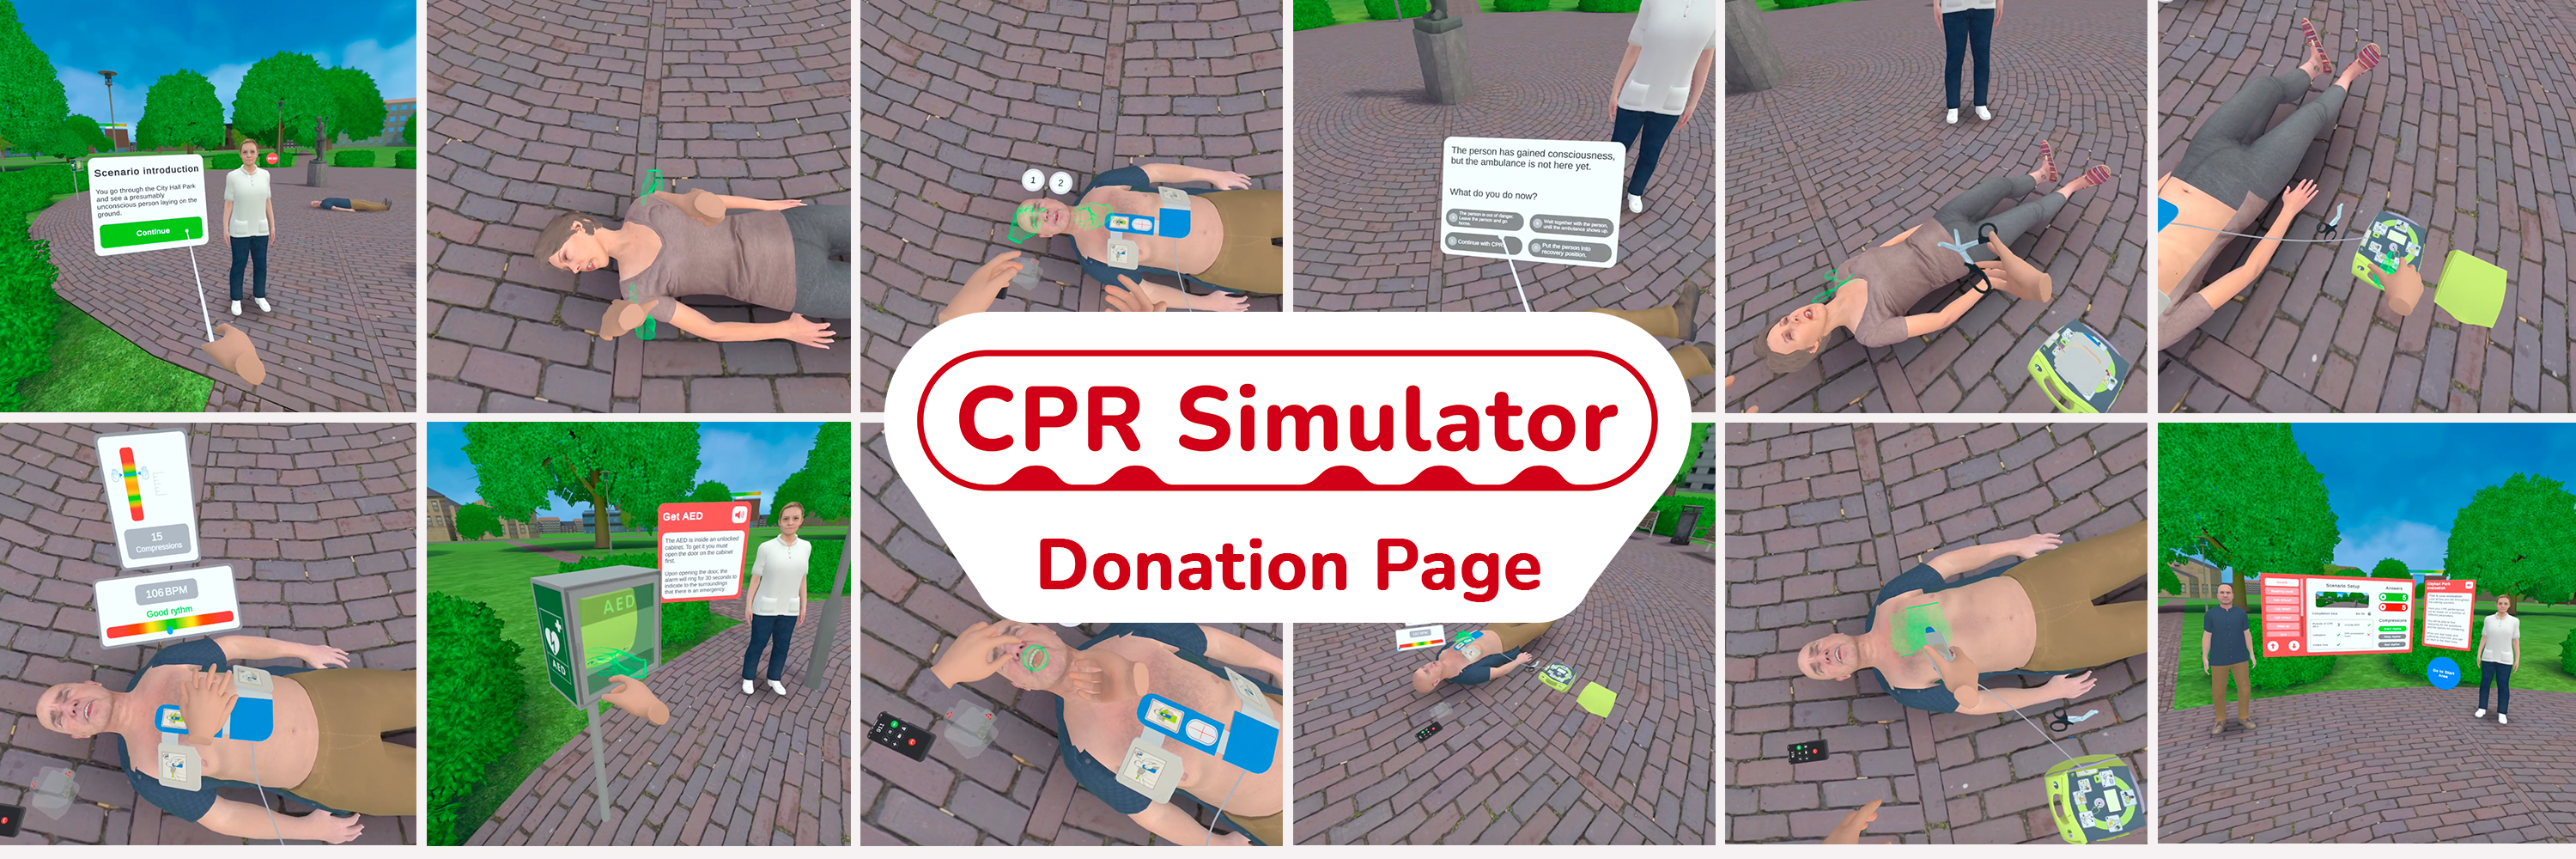 CPR Simulator - Donation Page